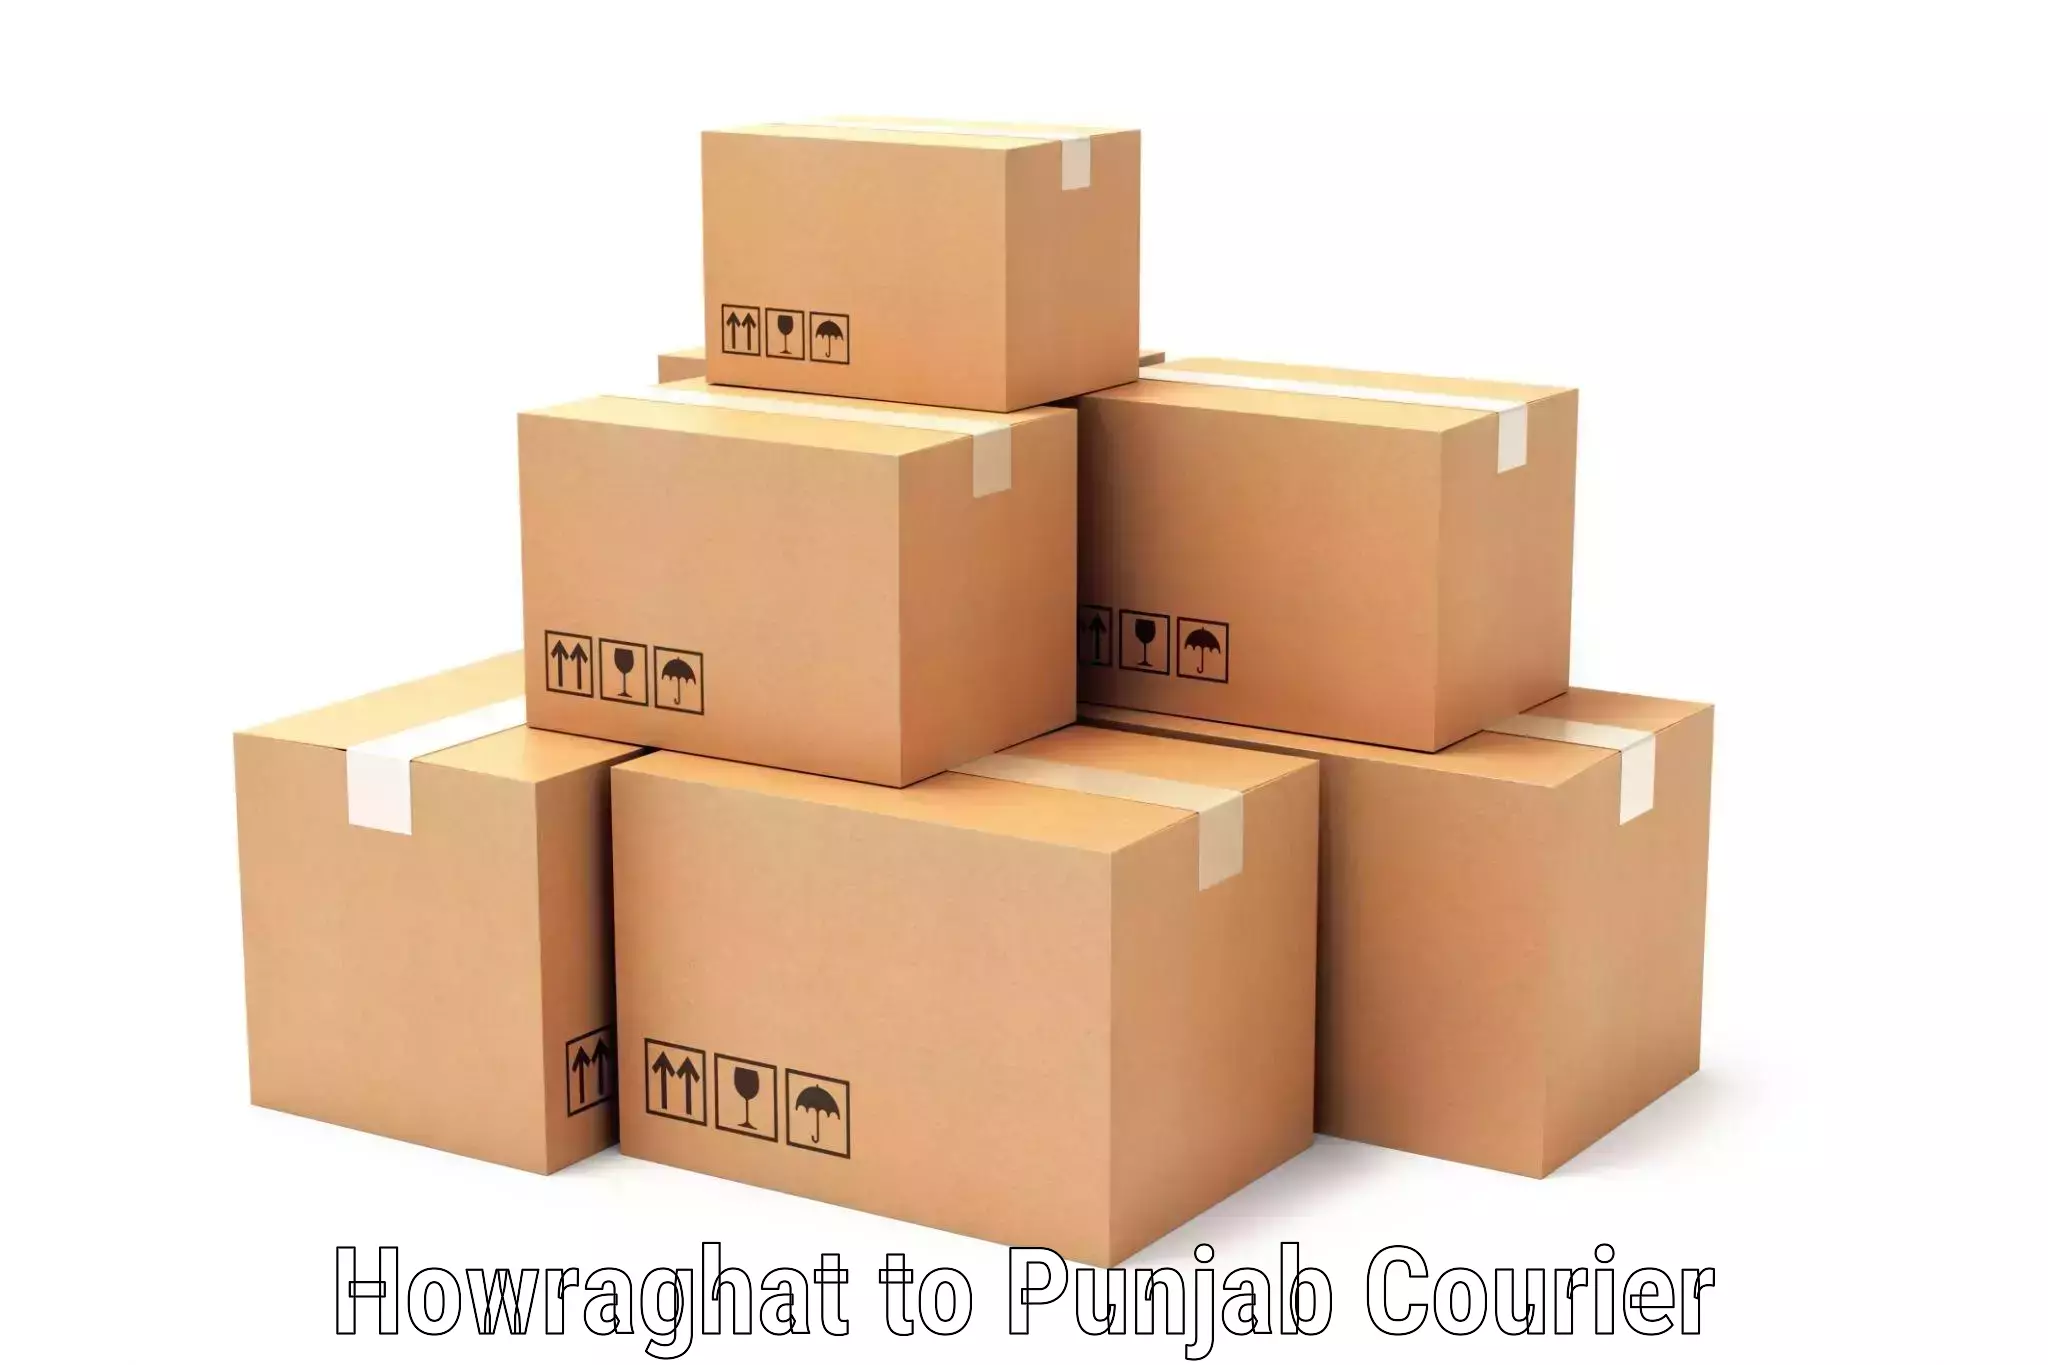 Heavy parcel delivery Howraghat to Talwara